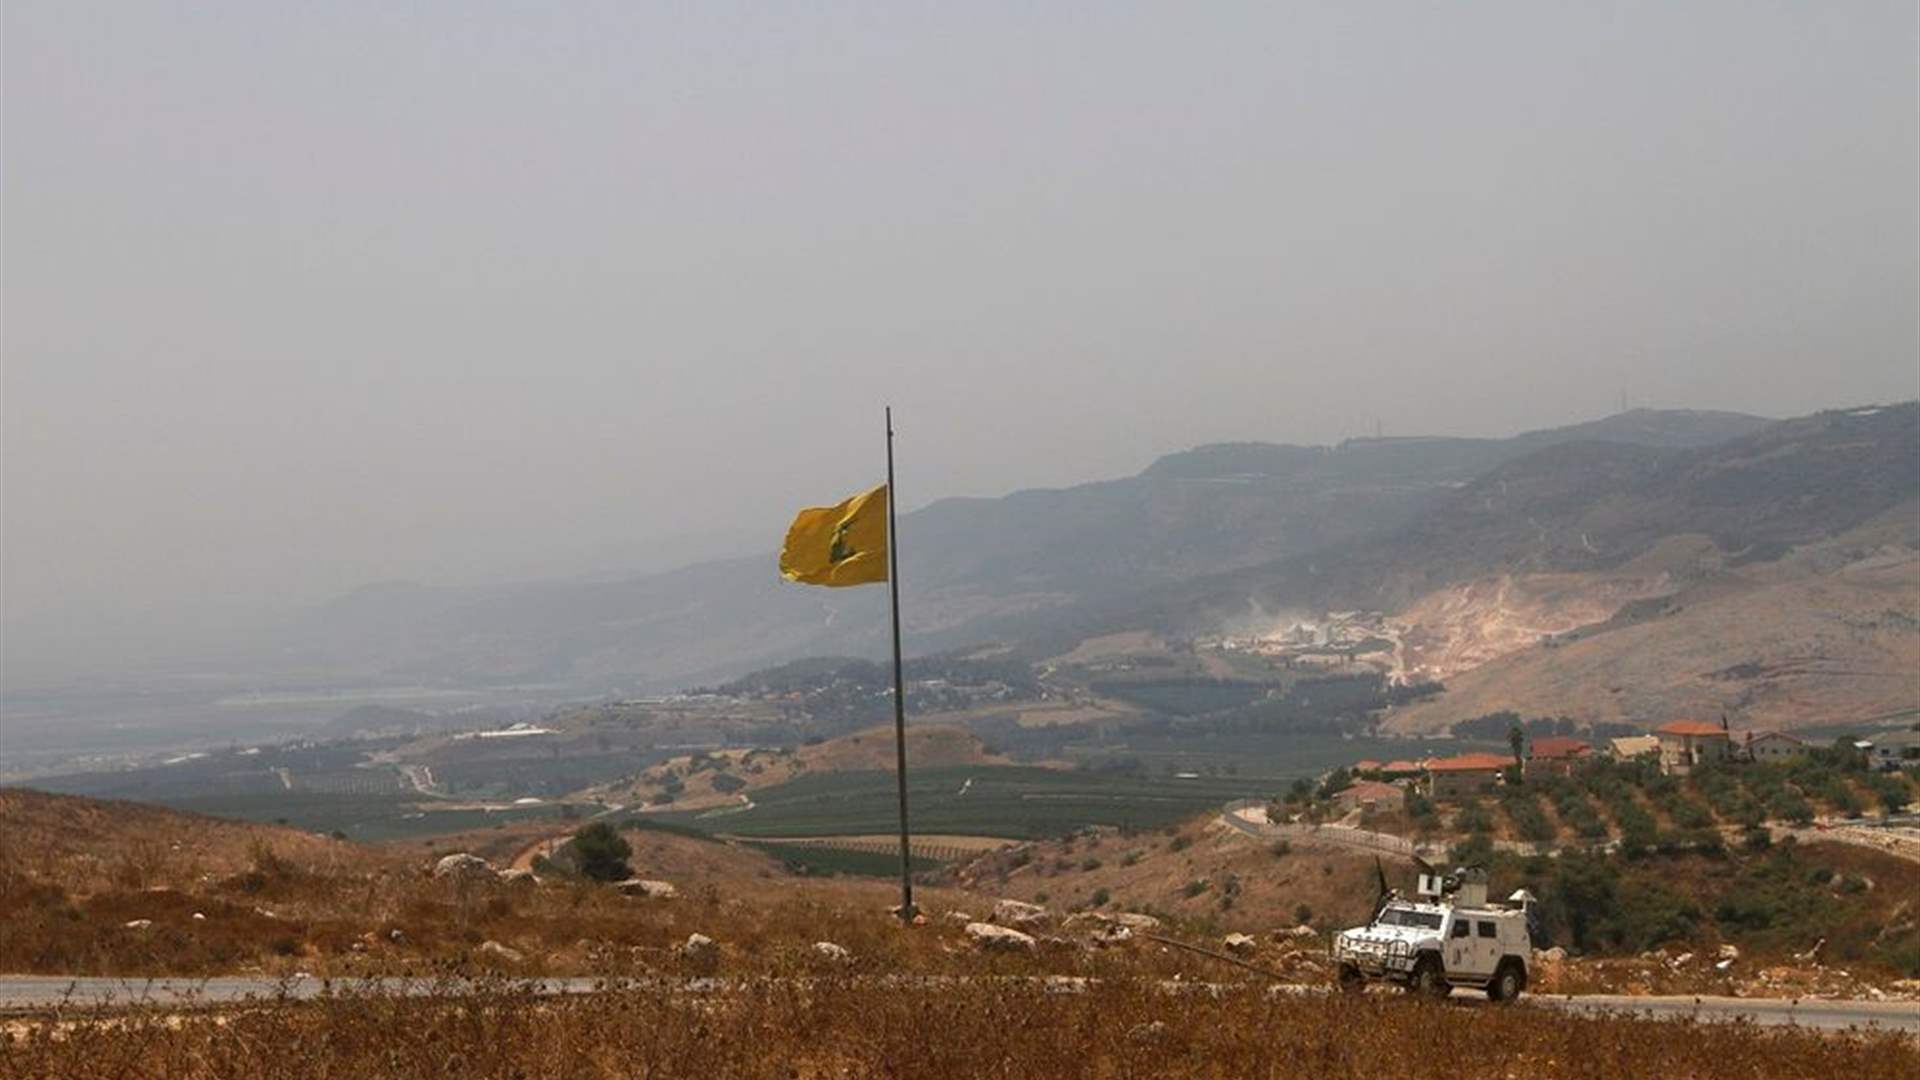 Hezbollah strikes Meron Air Surveillance Base in retaliation to recent assassinations: Second attack confirmed